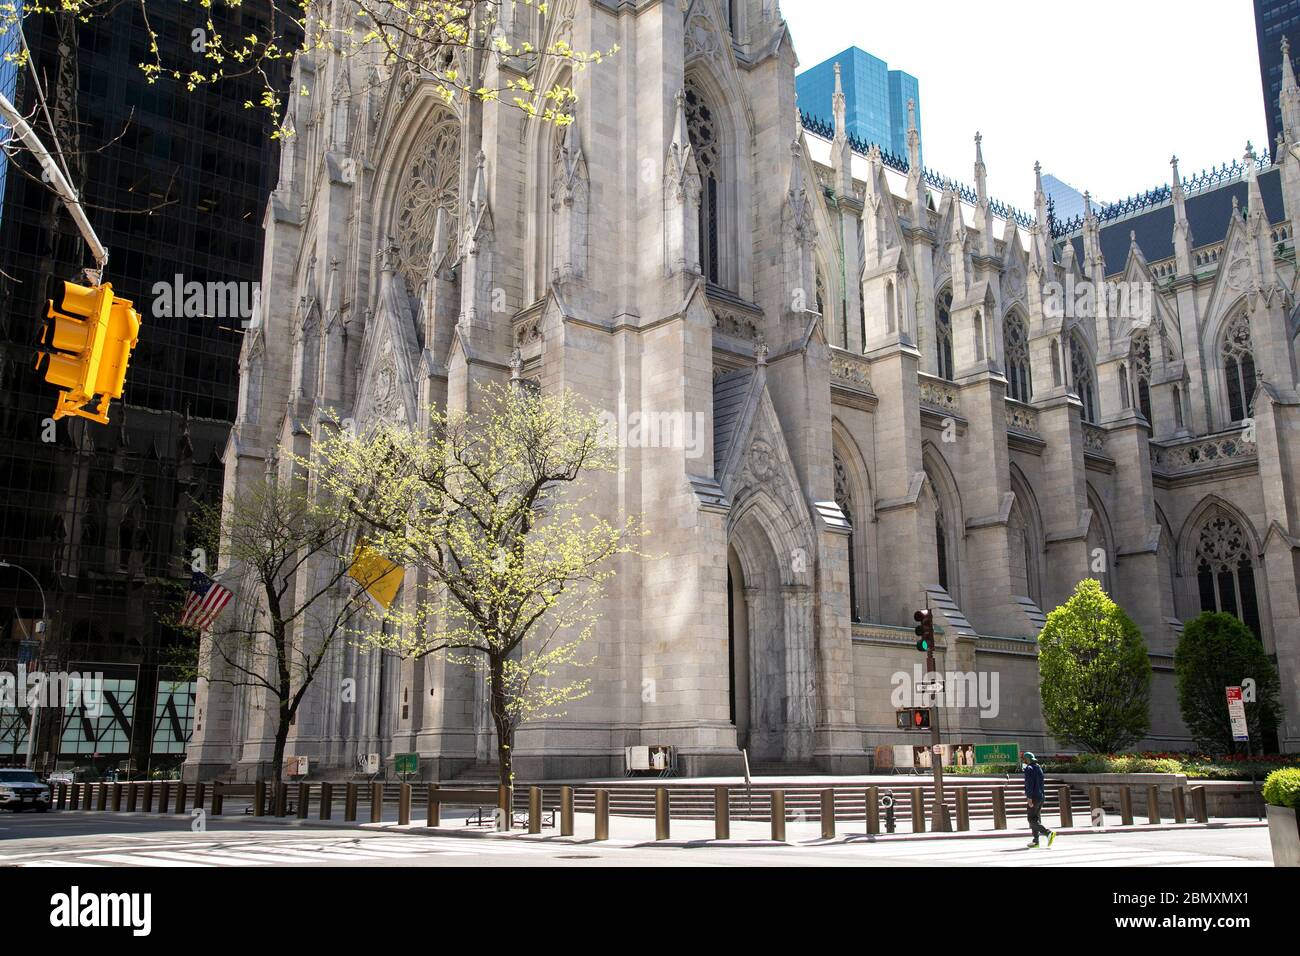 St. Patrick's Cathedral on 5th Avenue, New York City. Stock Photo